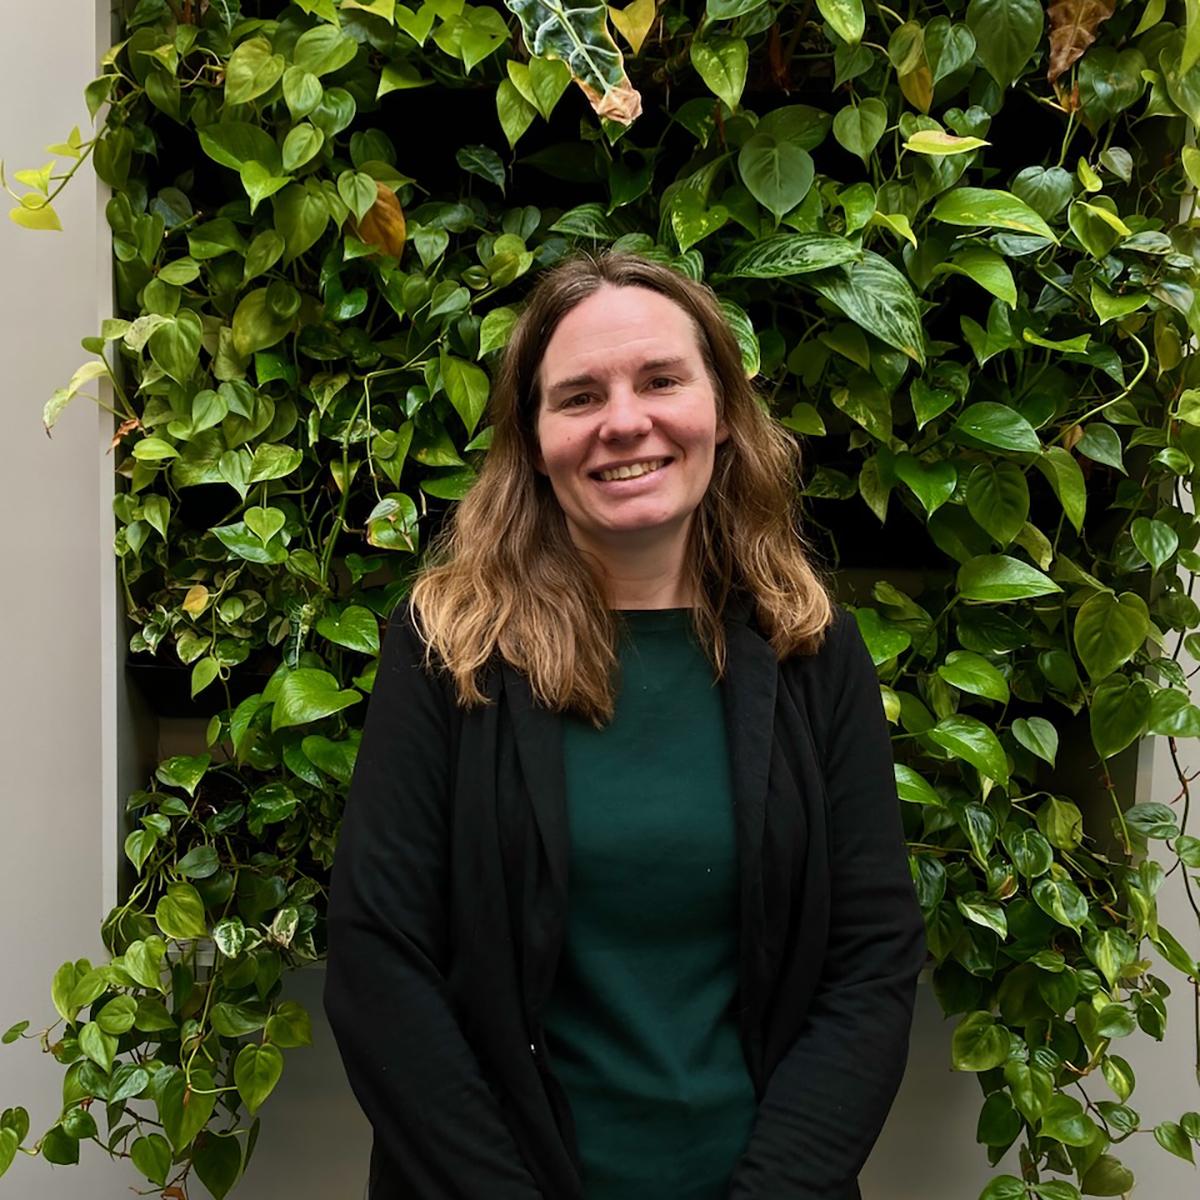 Portrait of Chrissy Daeschner smiling against a green plant wall